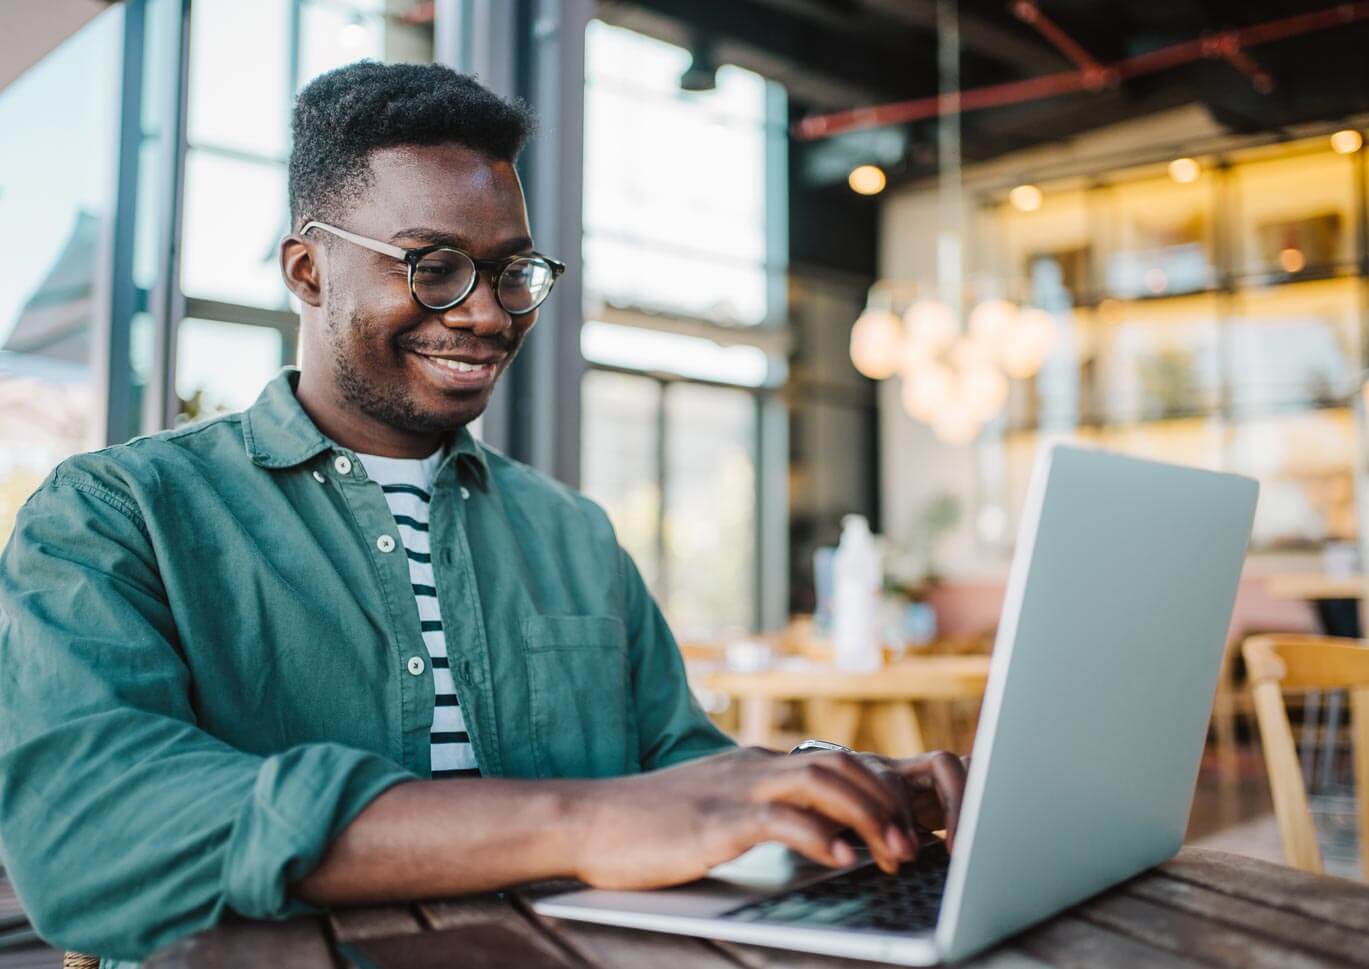 Young black man smiling and working at a laptop in a public space